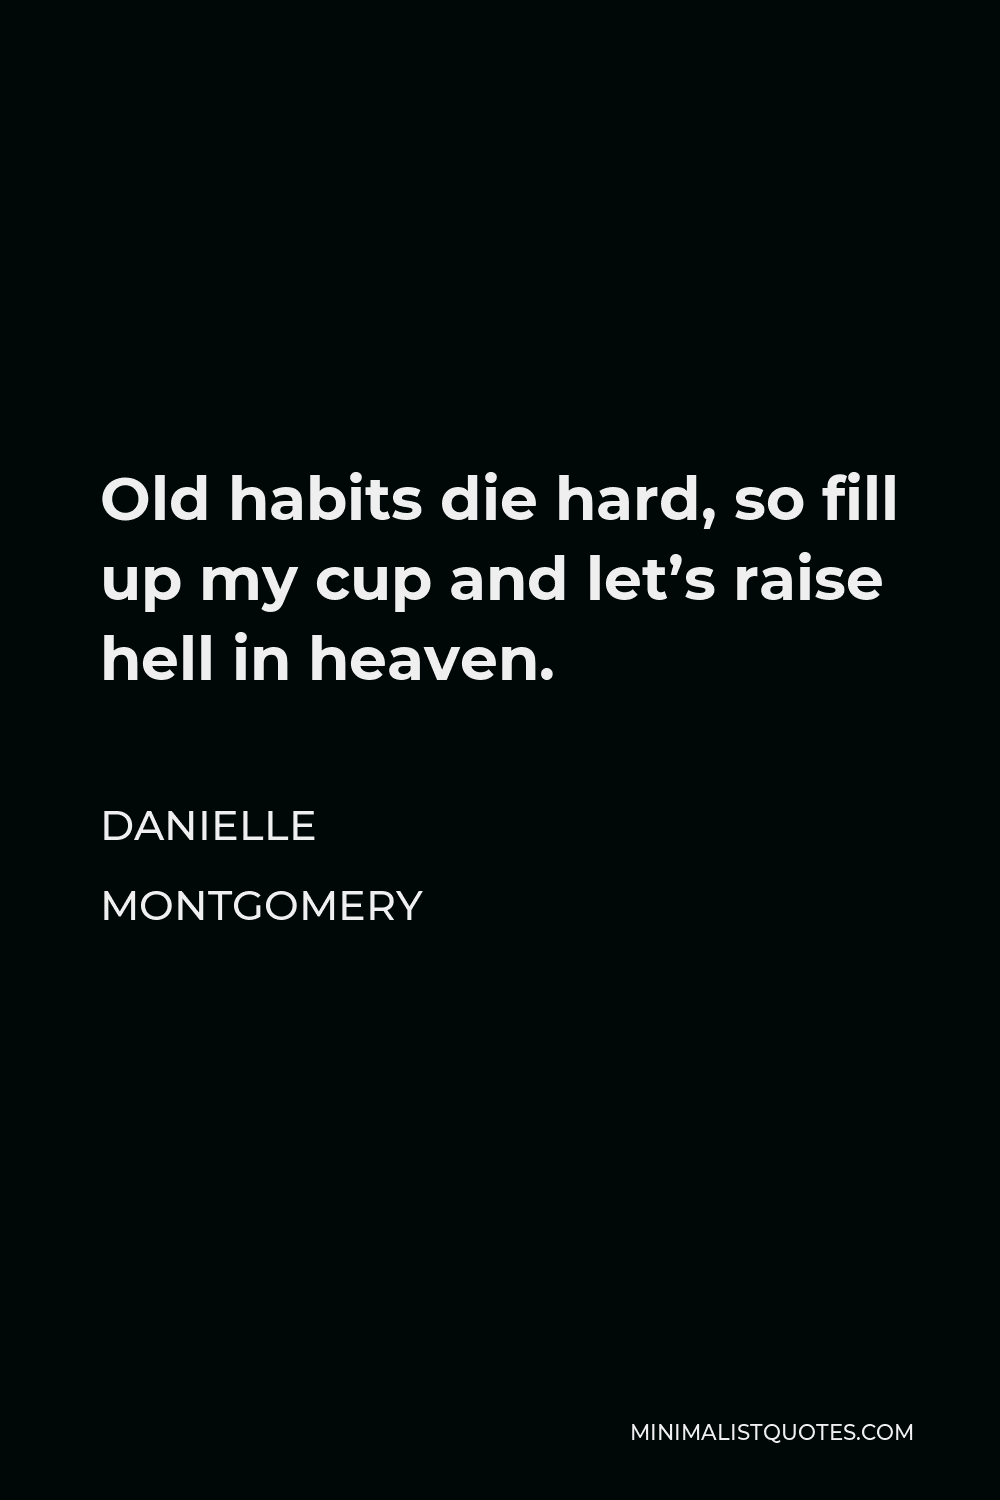 Danielle Montgomery Quote - Old habits die hard, so fill up my cup and let’s raise hell in heaven.